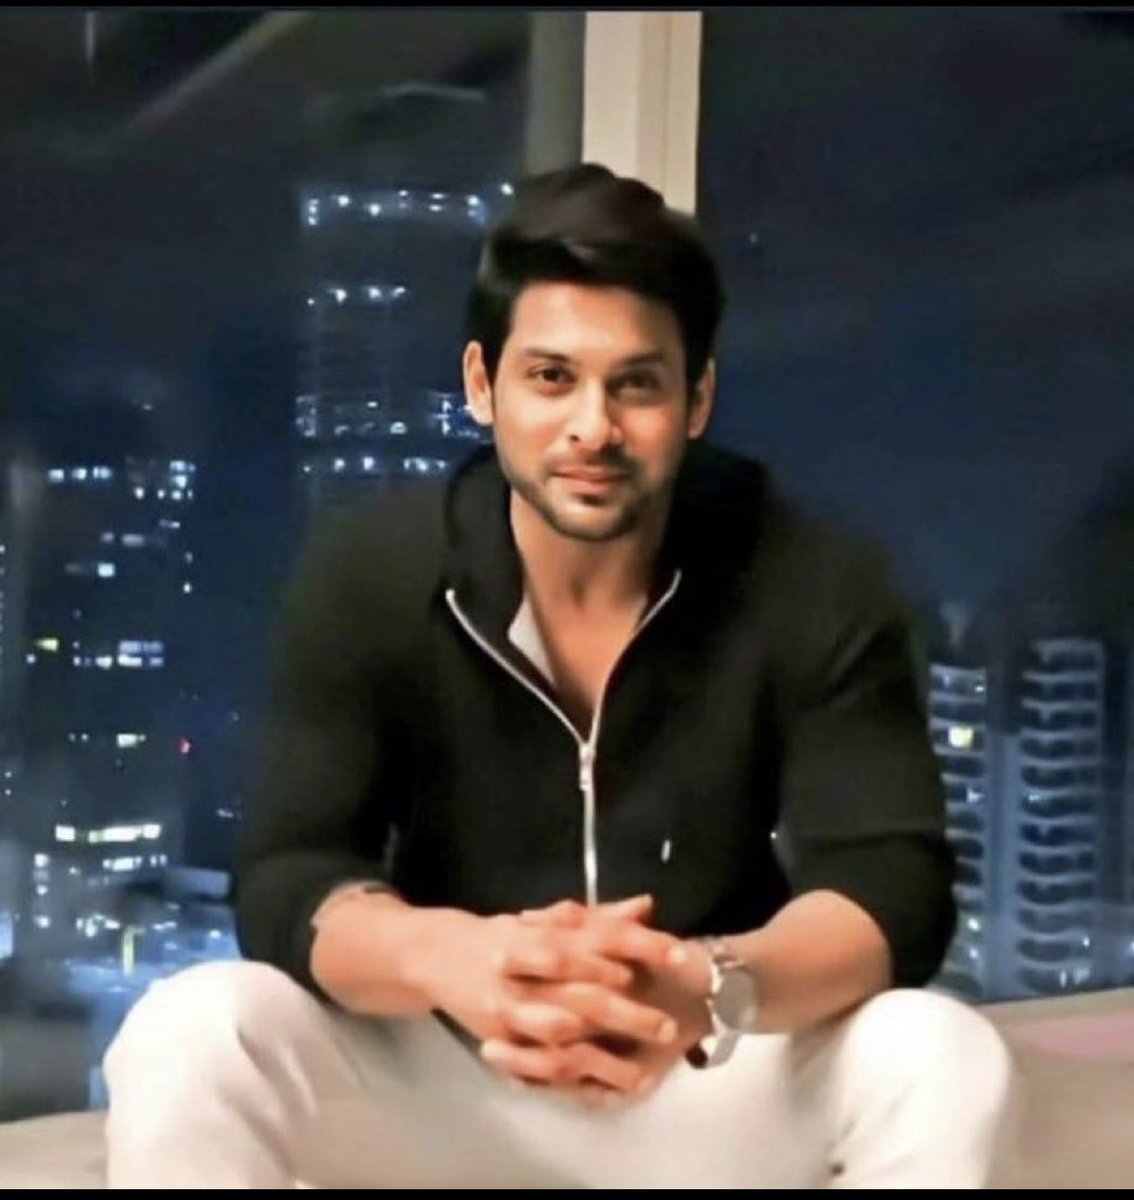 @sidharth_shukla Life has a way of testing a person’s will, either by having nothing happen at all or by having everything happen at once……missing you #SidharthShukla #SidharthShukIaLivesOn #SidharthShuklaForever #SidharthShukla𓃵 #SidharthShukla SIDHARTH SHUKLA FOREVER